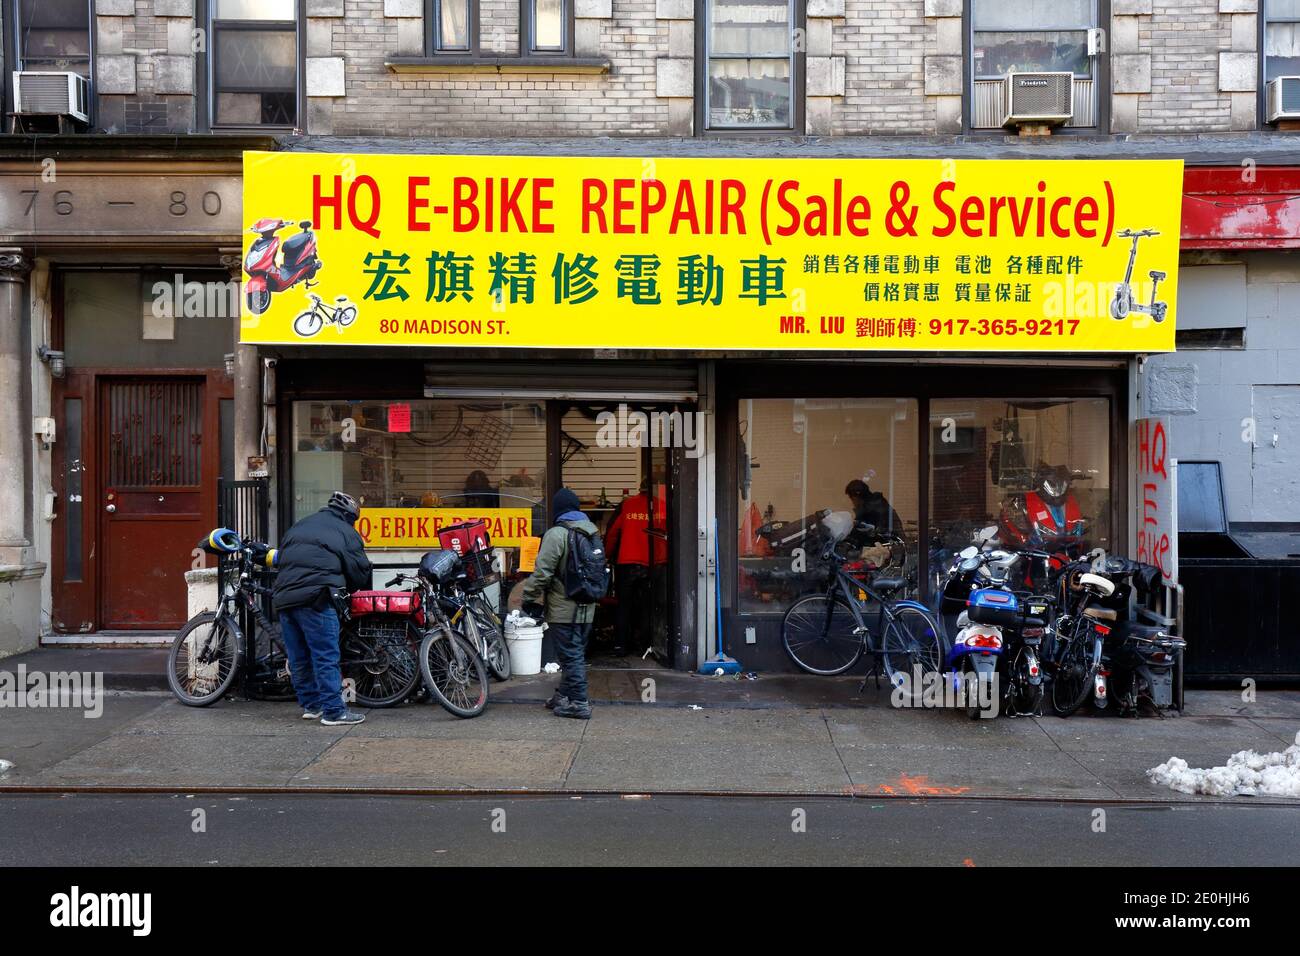 HQ E-bike Repair, 80 Madison St, New York, NY. exterior storefront of an e bike repair shop in the Lower East Side neighborhood of Manhattan. Stock Photo